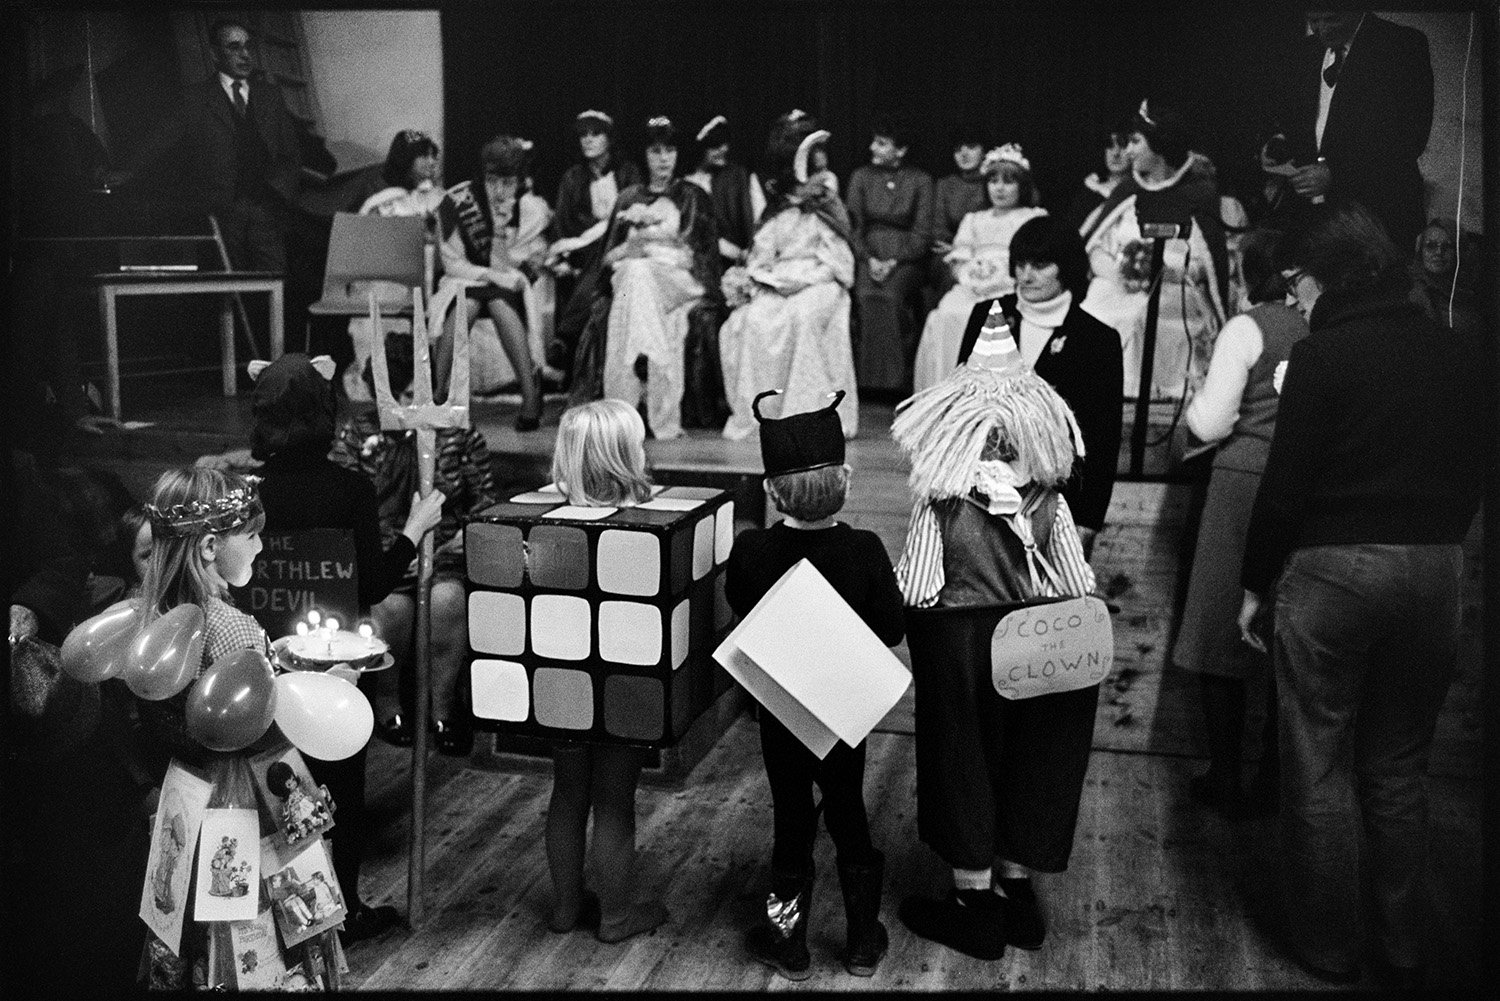 People in fancy dress waiting to go on parade in village hall. 
[Children taking part in a fancy dress parade in Northlew Village Hall for Northlew Carnival. One child is dressed as a Rubik's cube and another as Coco the Clown. Another girl is carrying a cake with candles. The carnival Queen and attendants are watching in the background.]